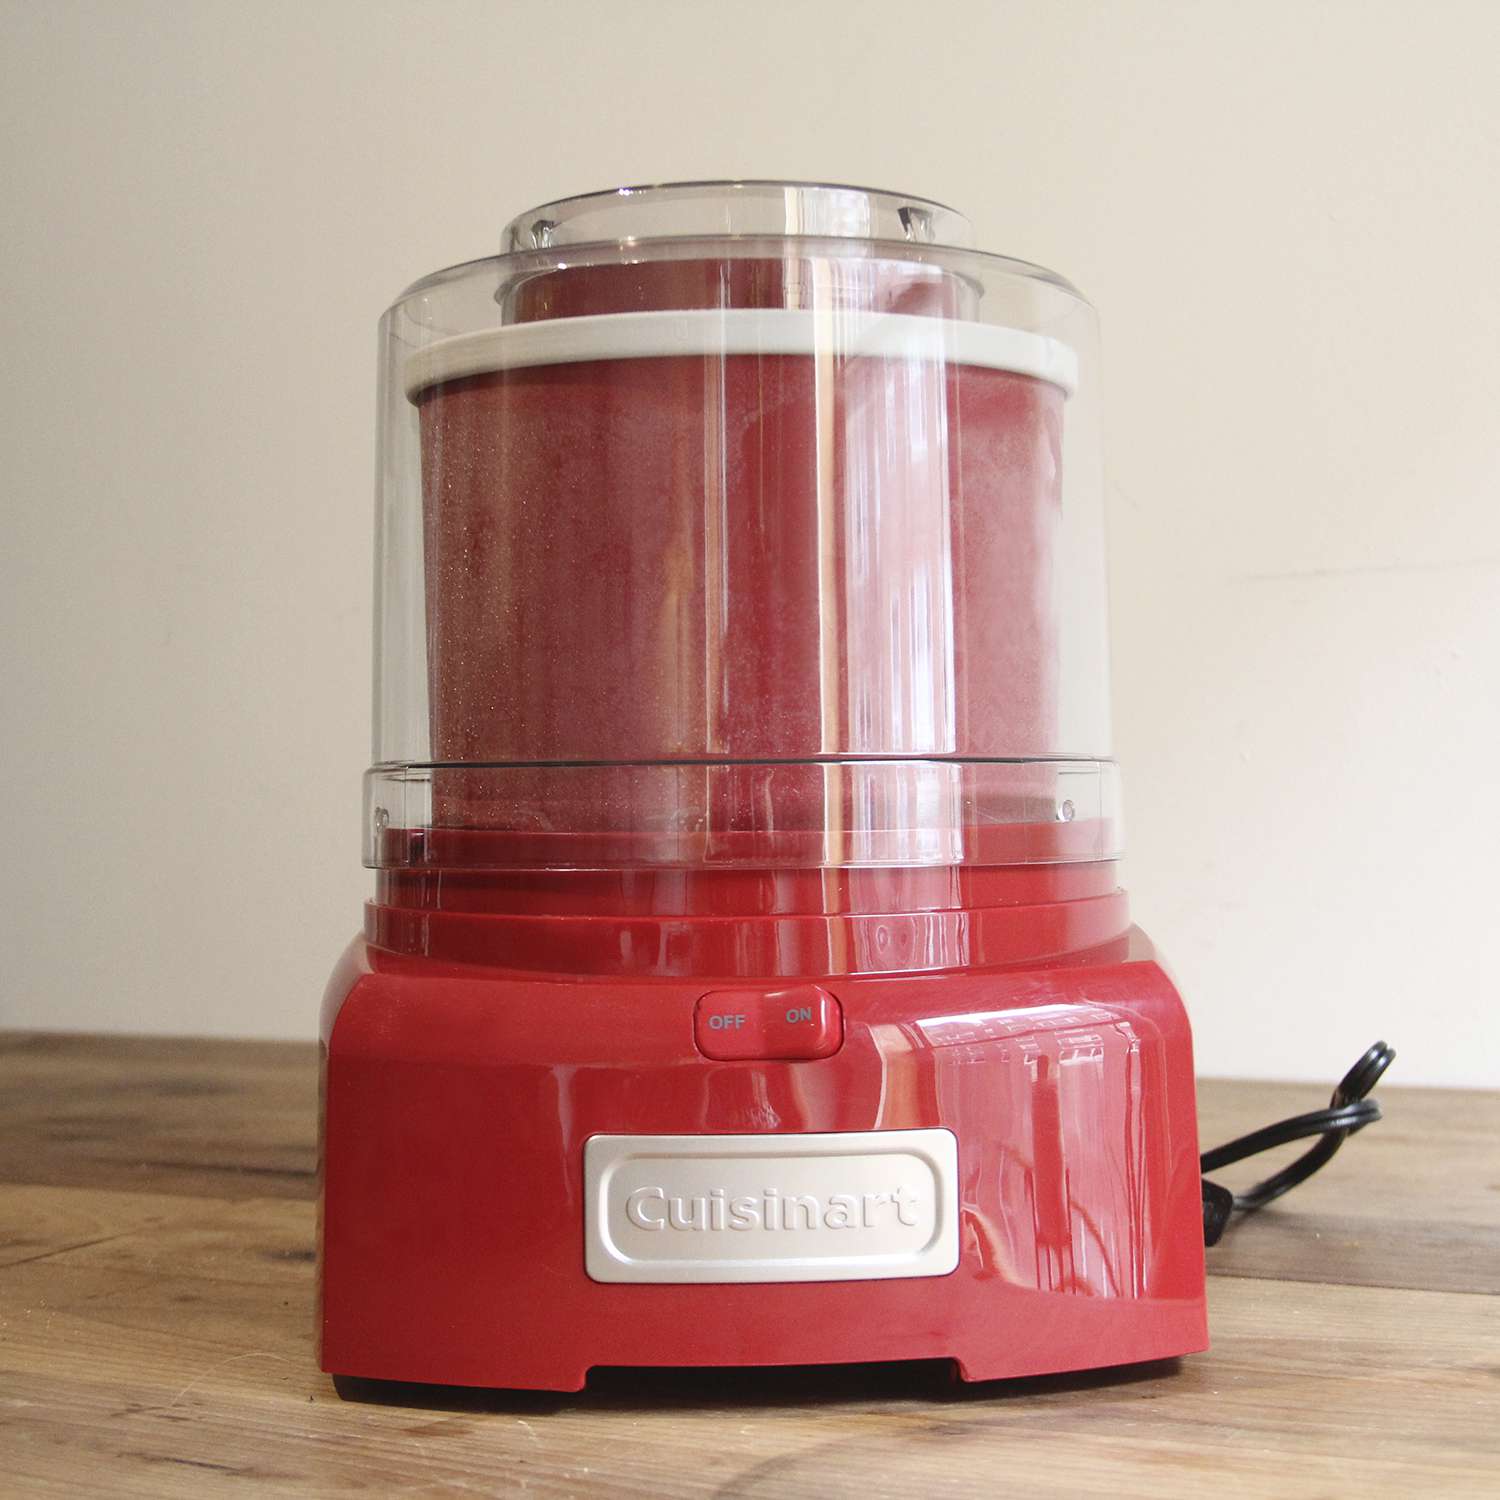 How Long Does The Cuisinart Ice Cream Maker Take